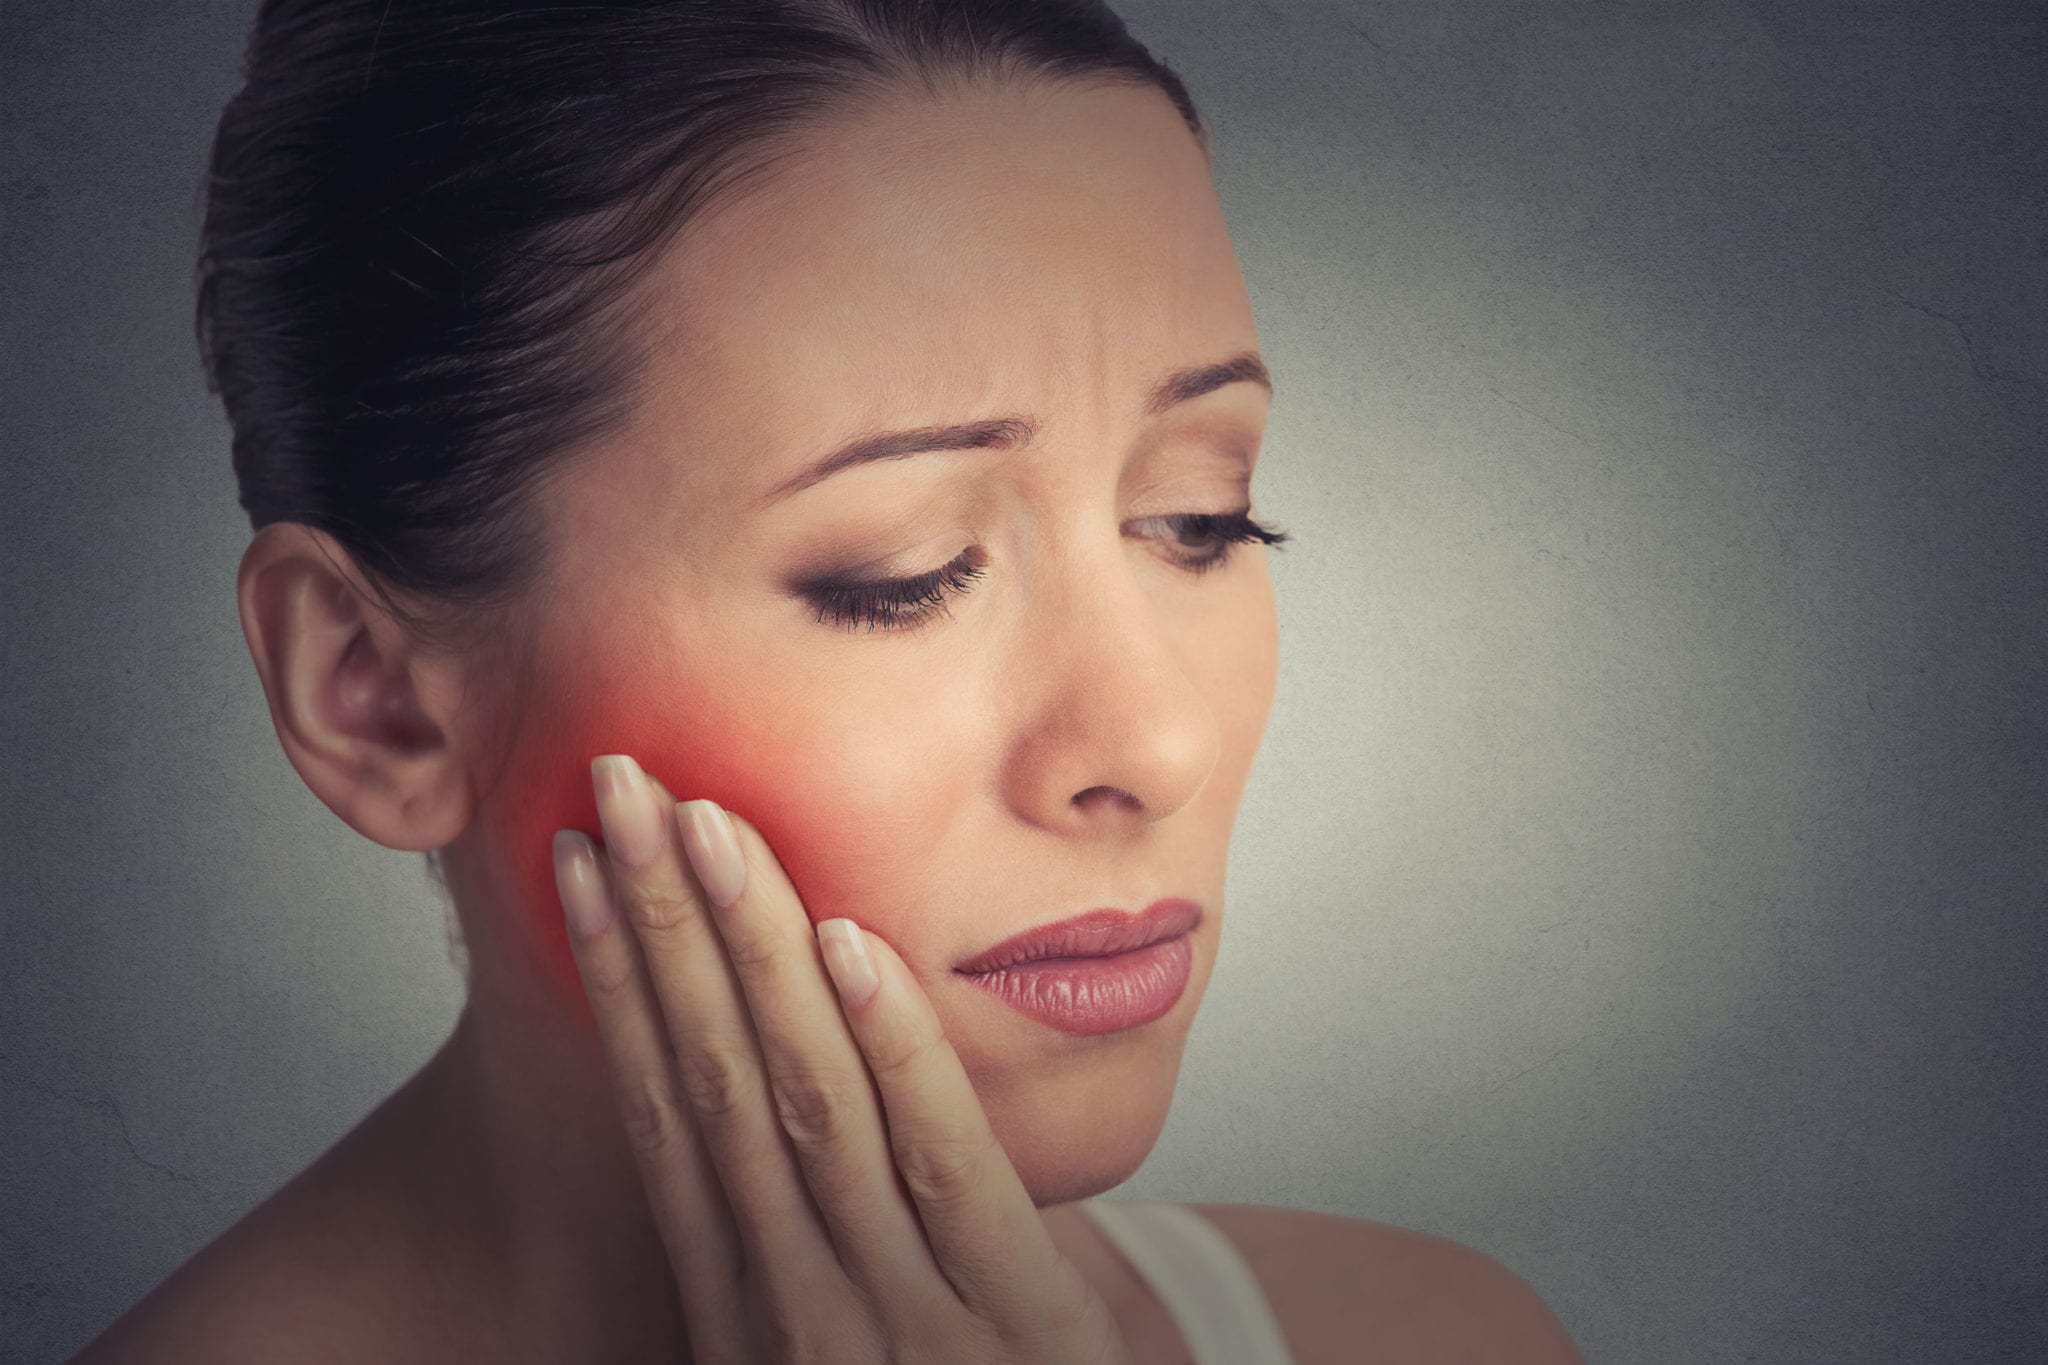 South Florida Tooth Abscess Treatment